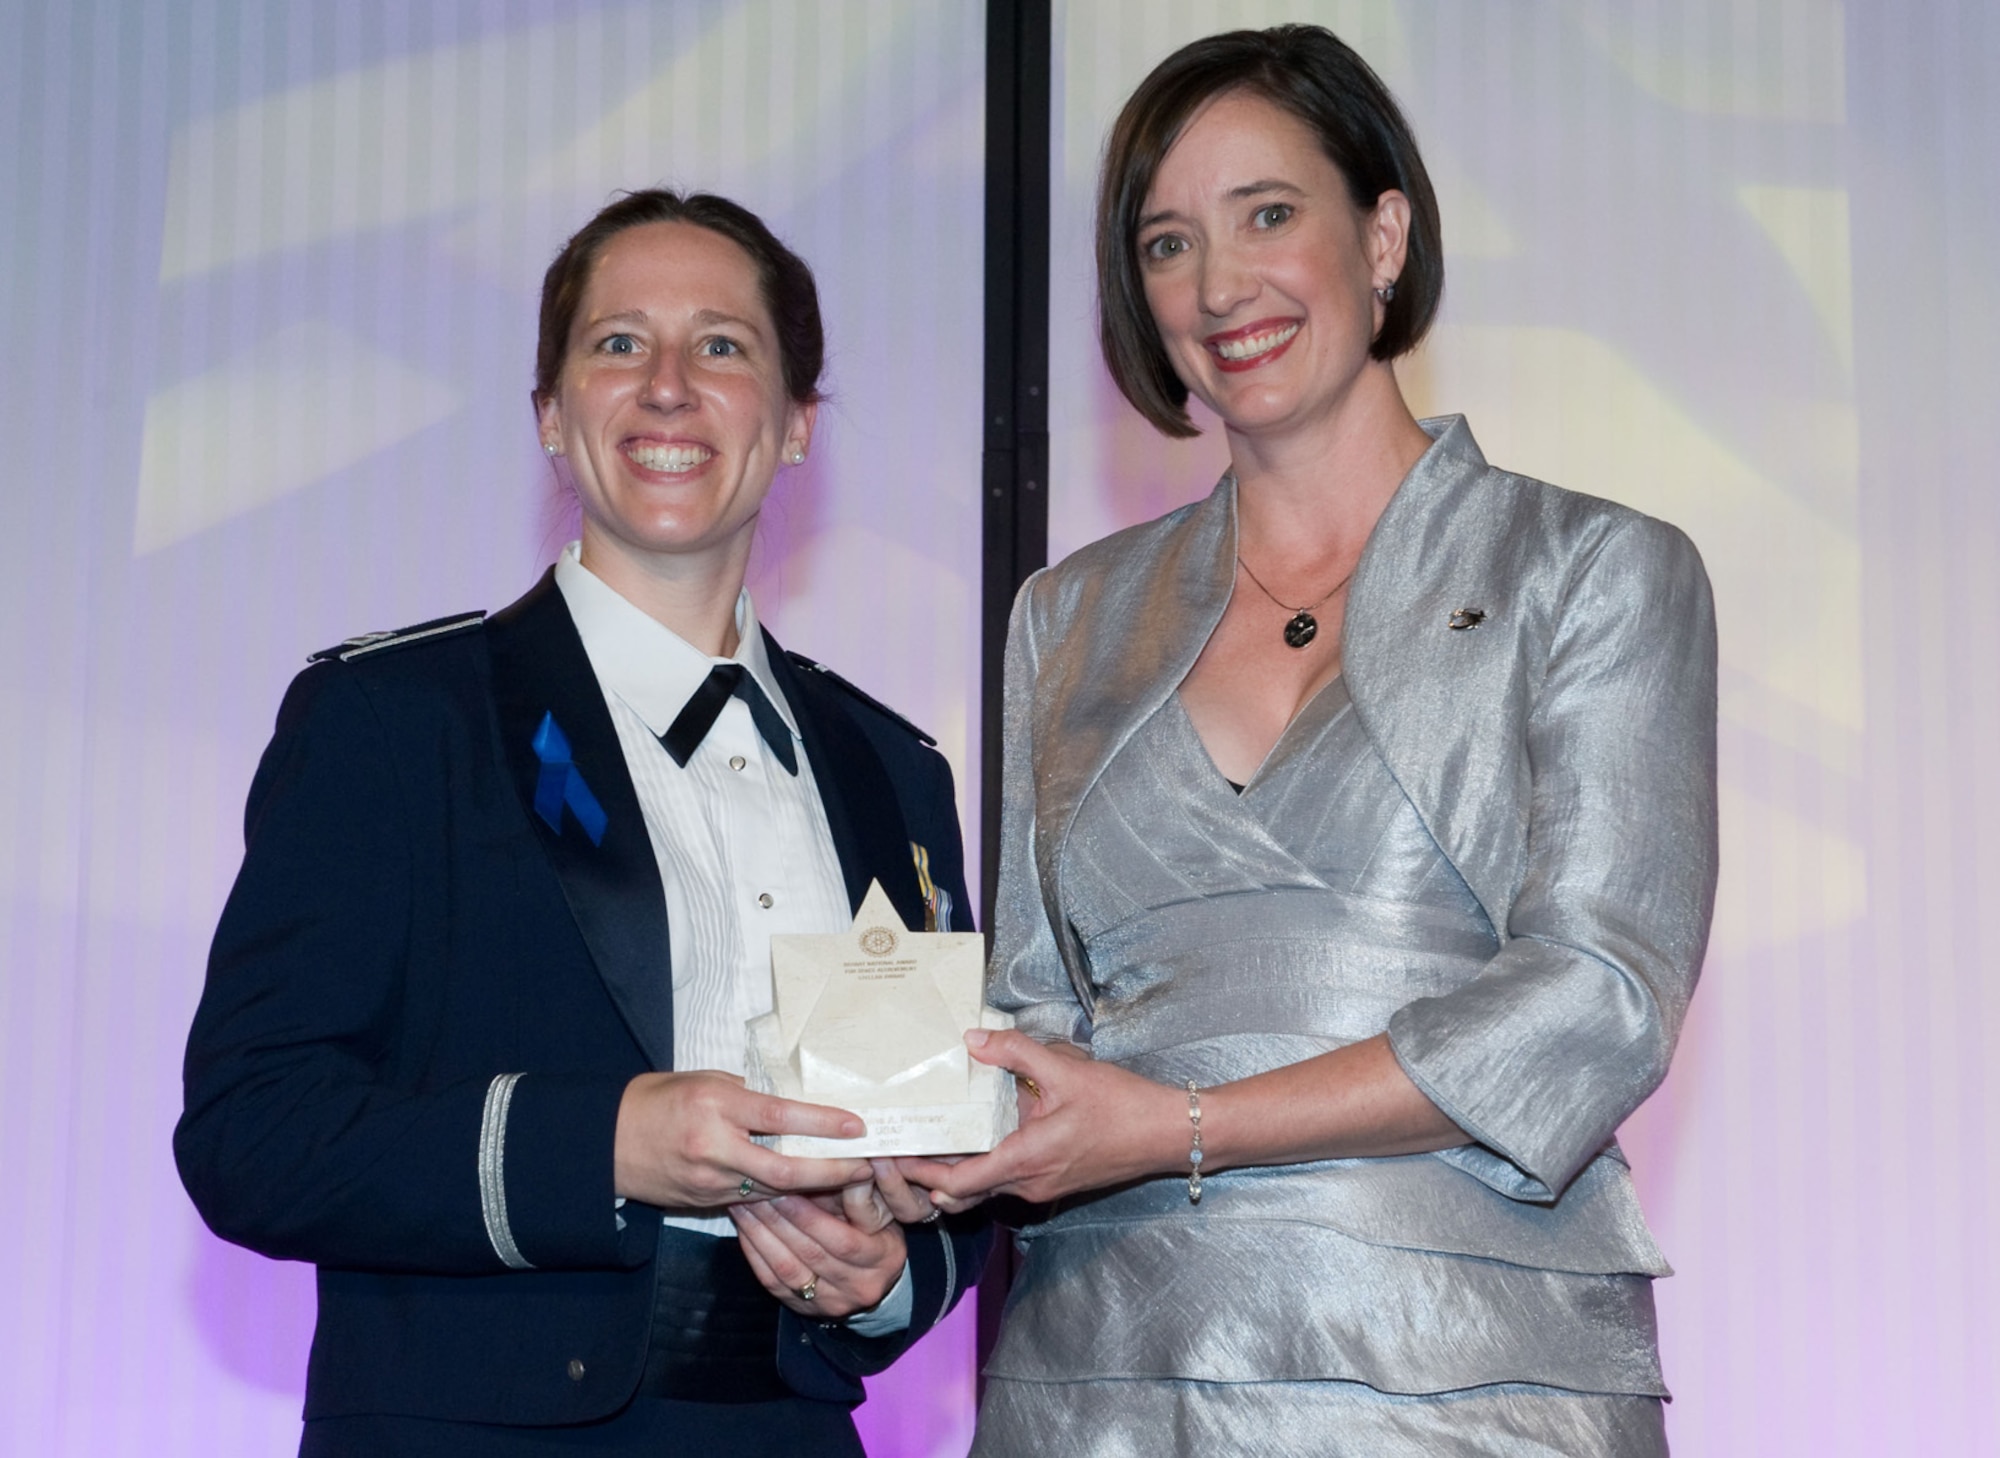 Capt. Gina Peterson, Global Positioning Systems Wing, is the recipient of an individual award from the Rotary National Award for Space Achievement Foundation for her work on the atomic clocks that will be aboard the next generation of GPS III satellites. (Courtesy photo)